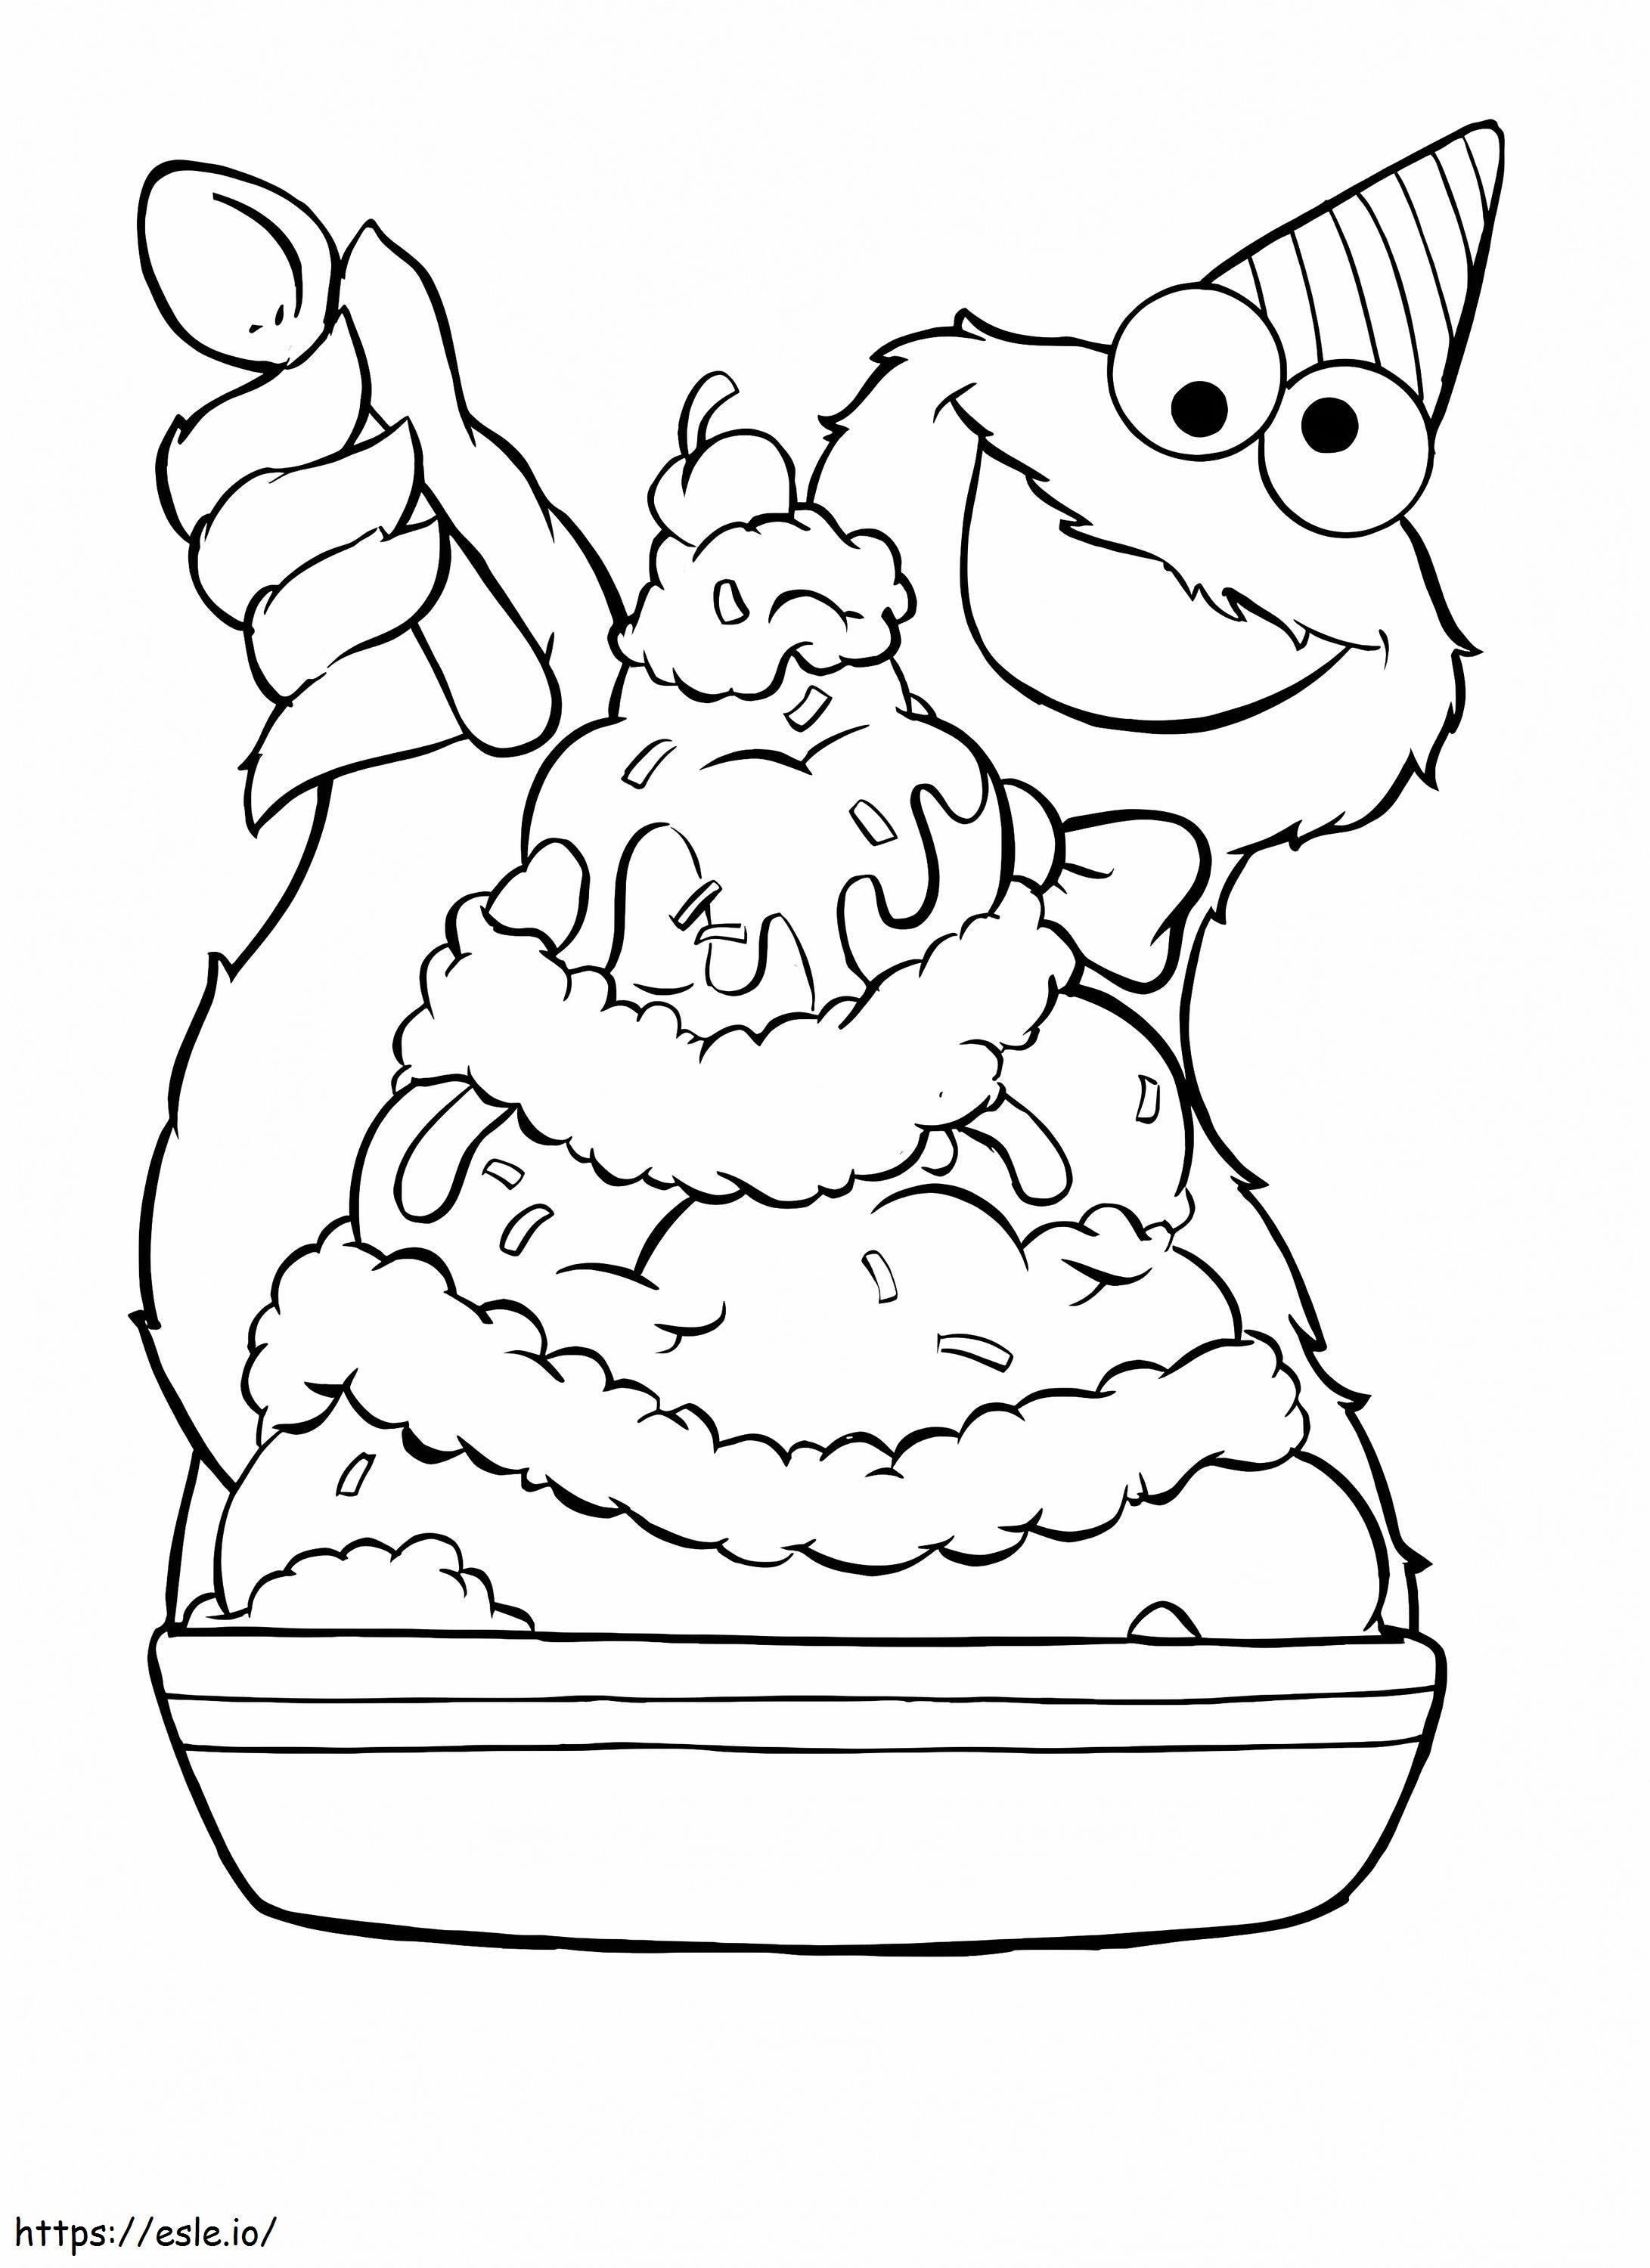 Cookie Monster With Big Cake coloring page